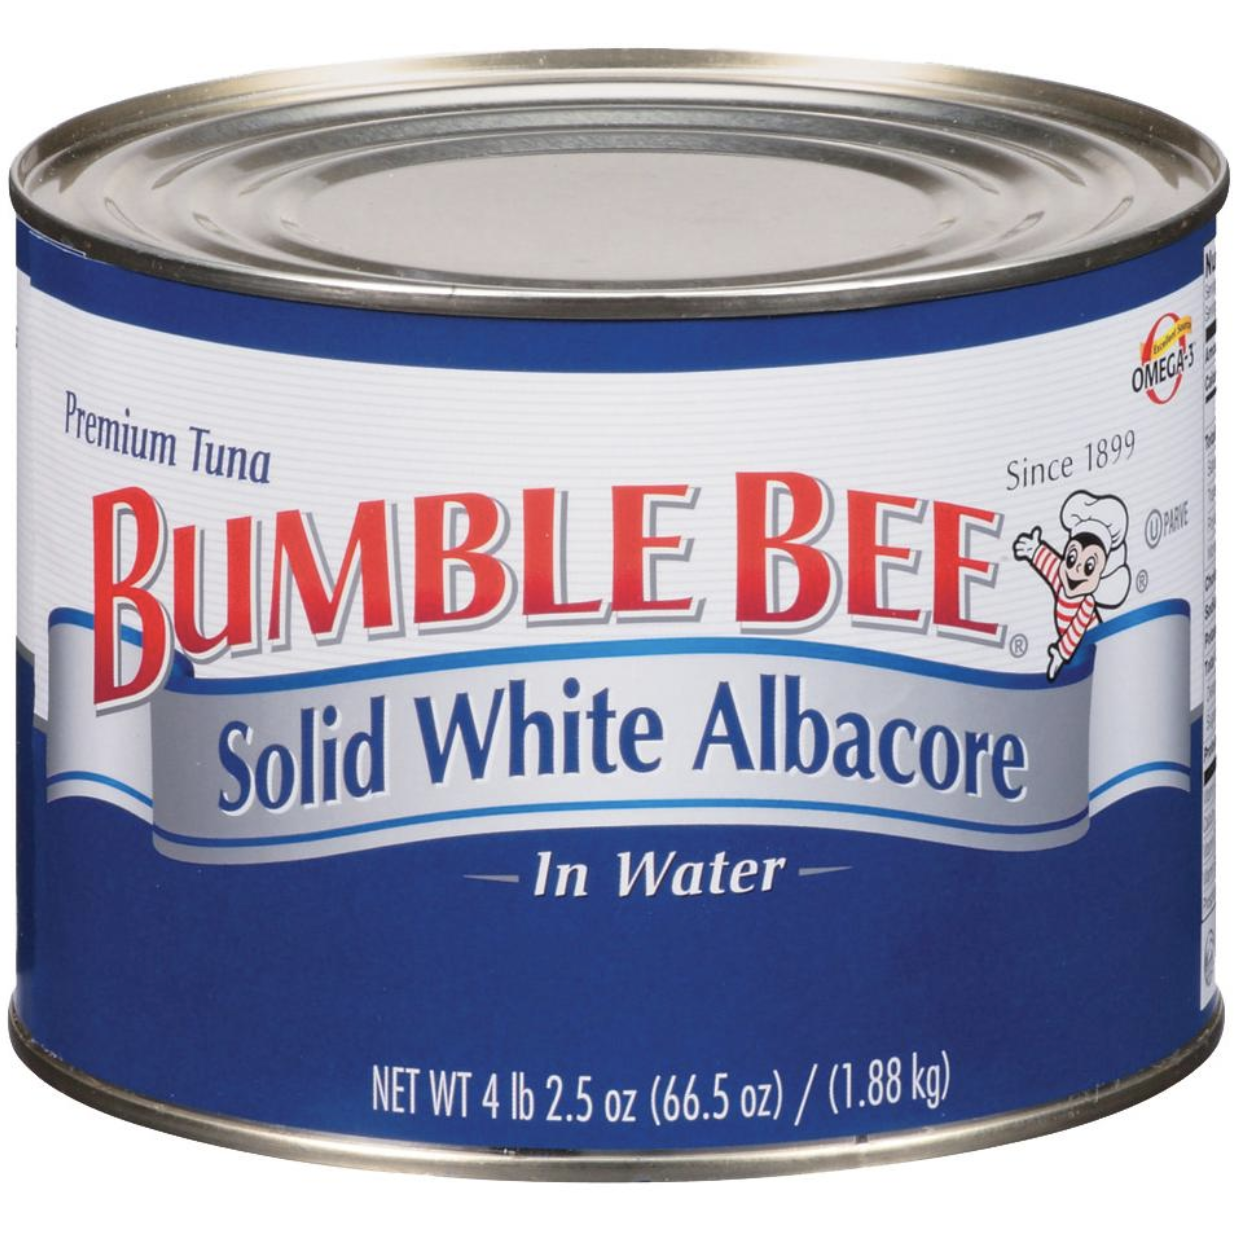 Bumble Bee Solid White Albacore Tuna in Water, 66.5 oz.